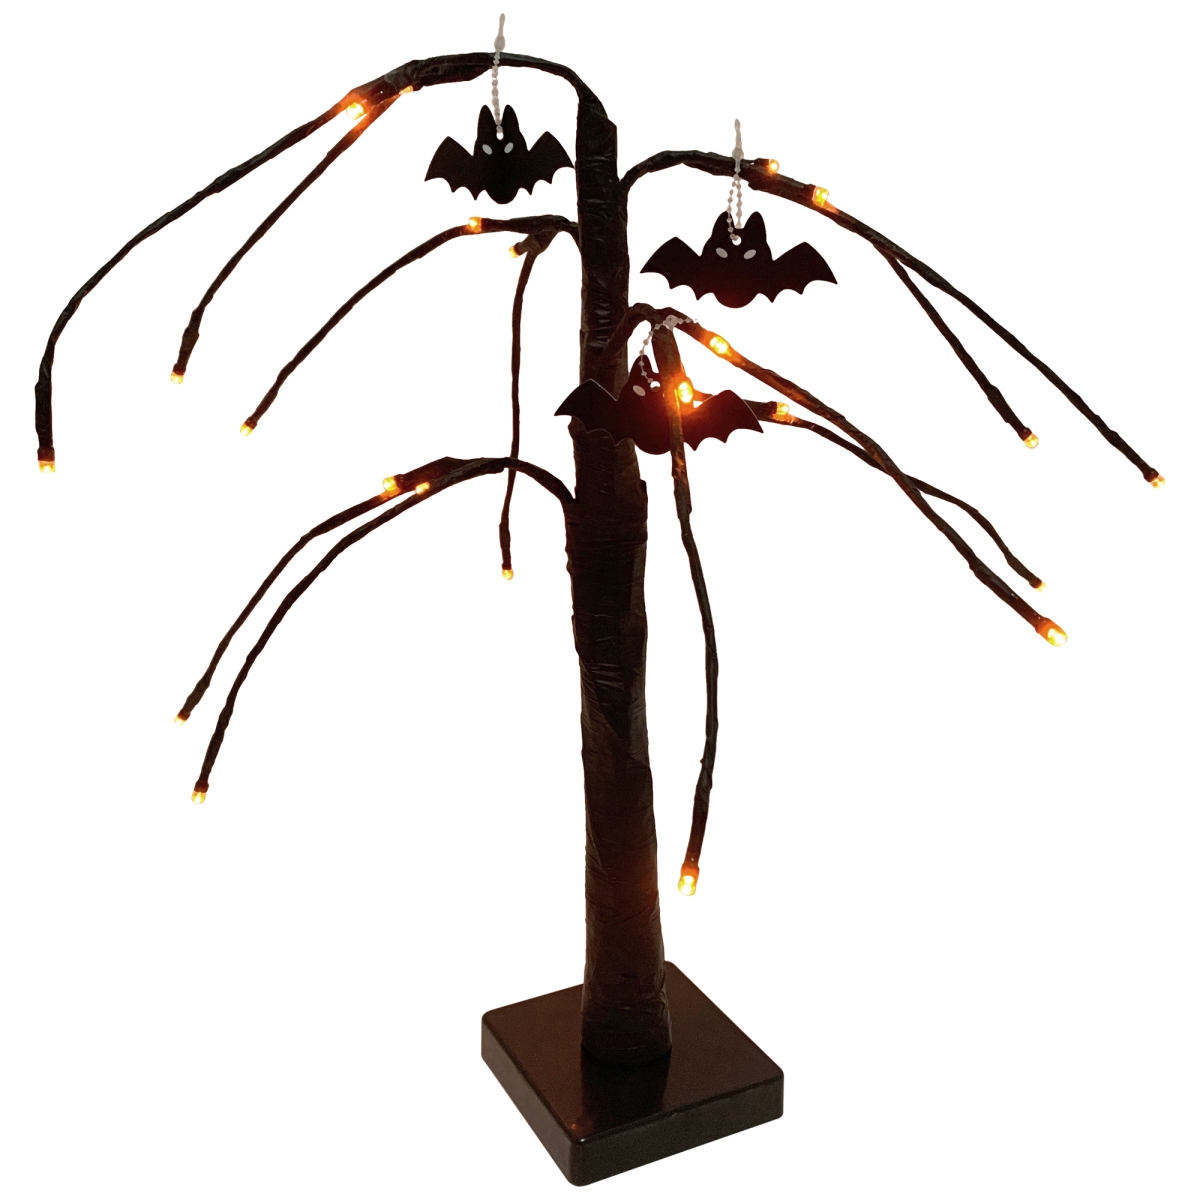 Picture of Northlight 34858404 24 in. LED Lighted Black Weeping Halloween Twig Tree - Orange Lights